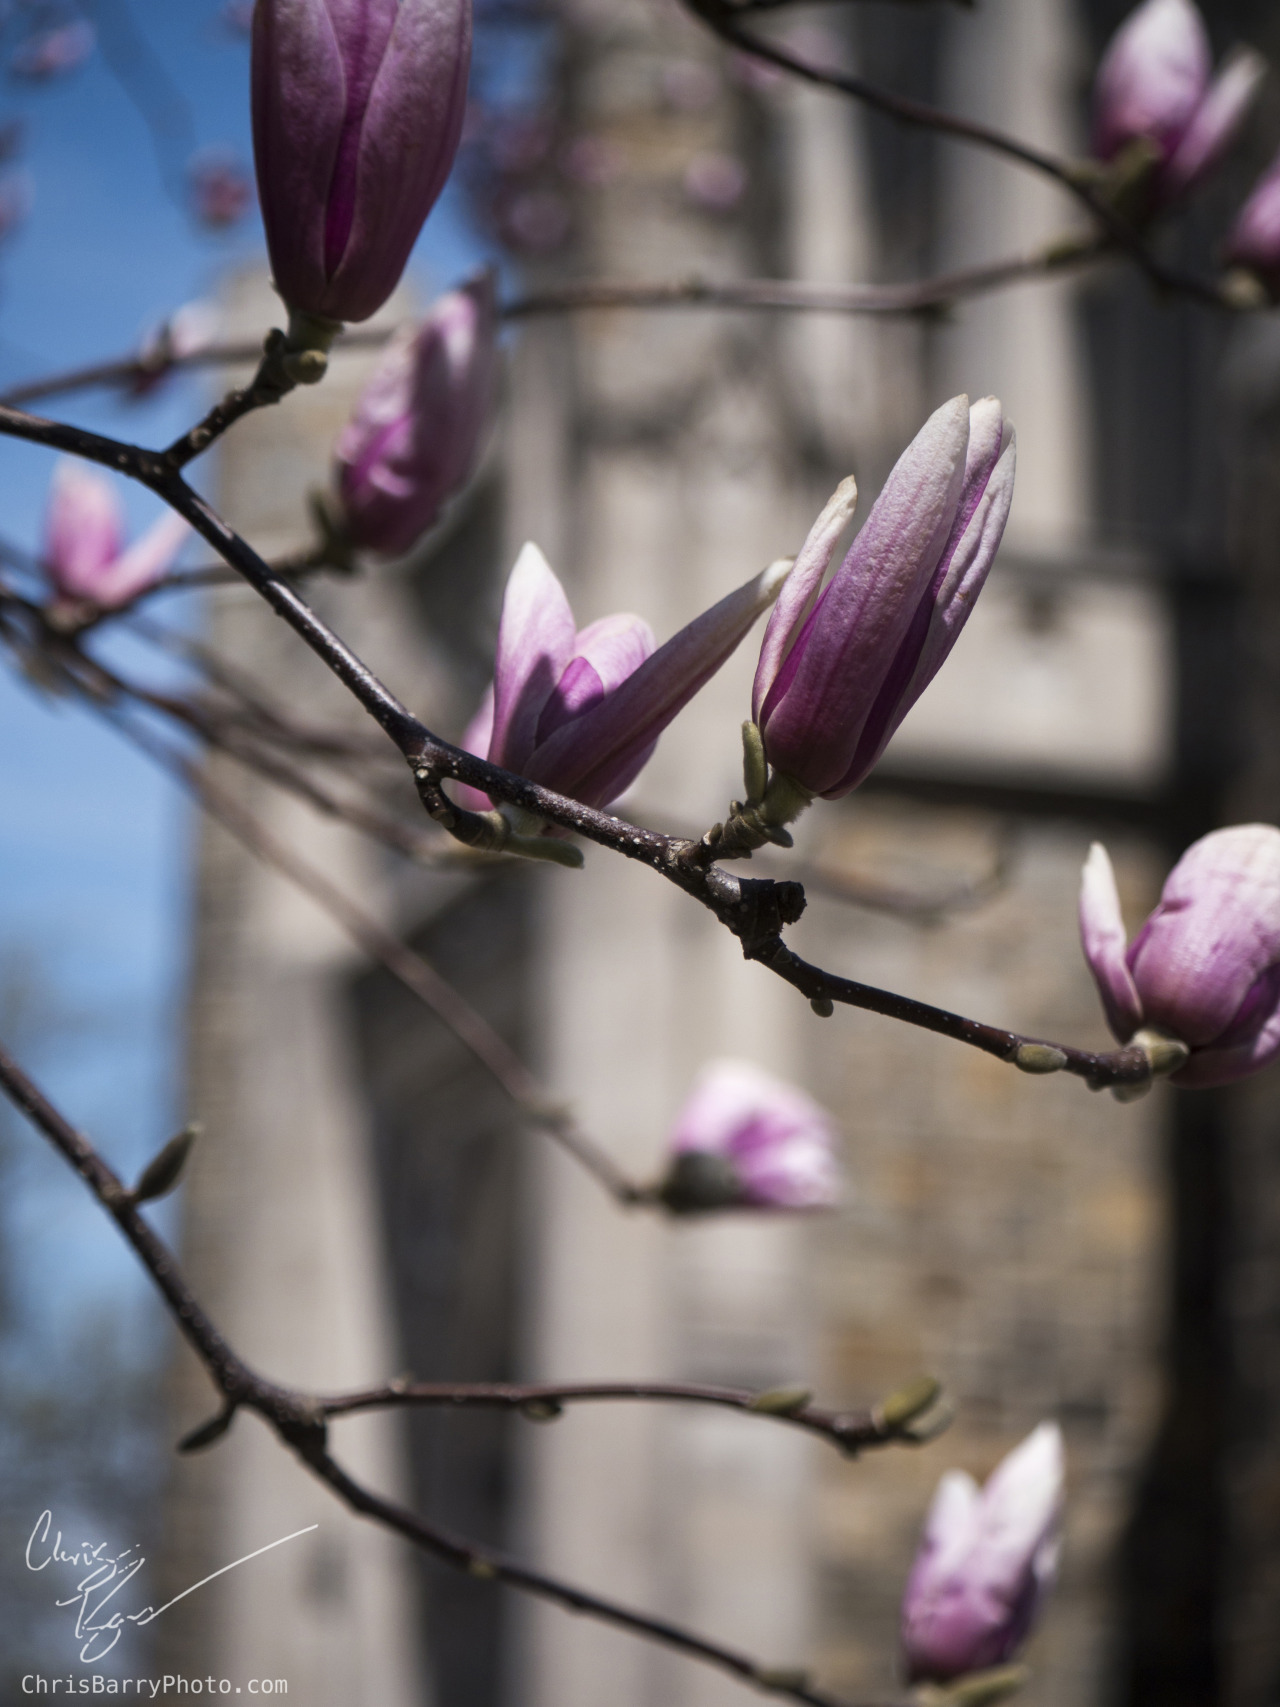 And finally magnolias in front of Linderman